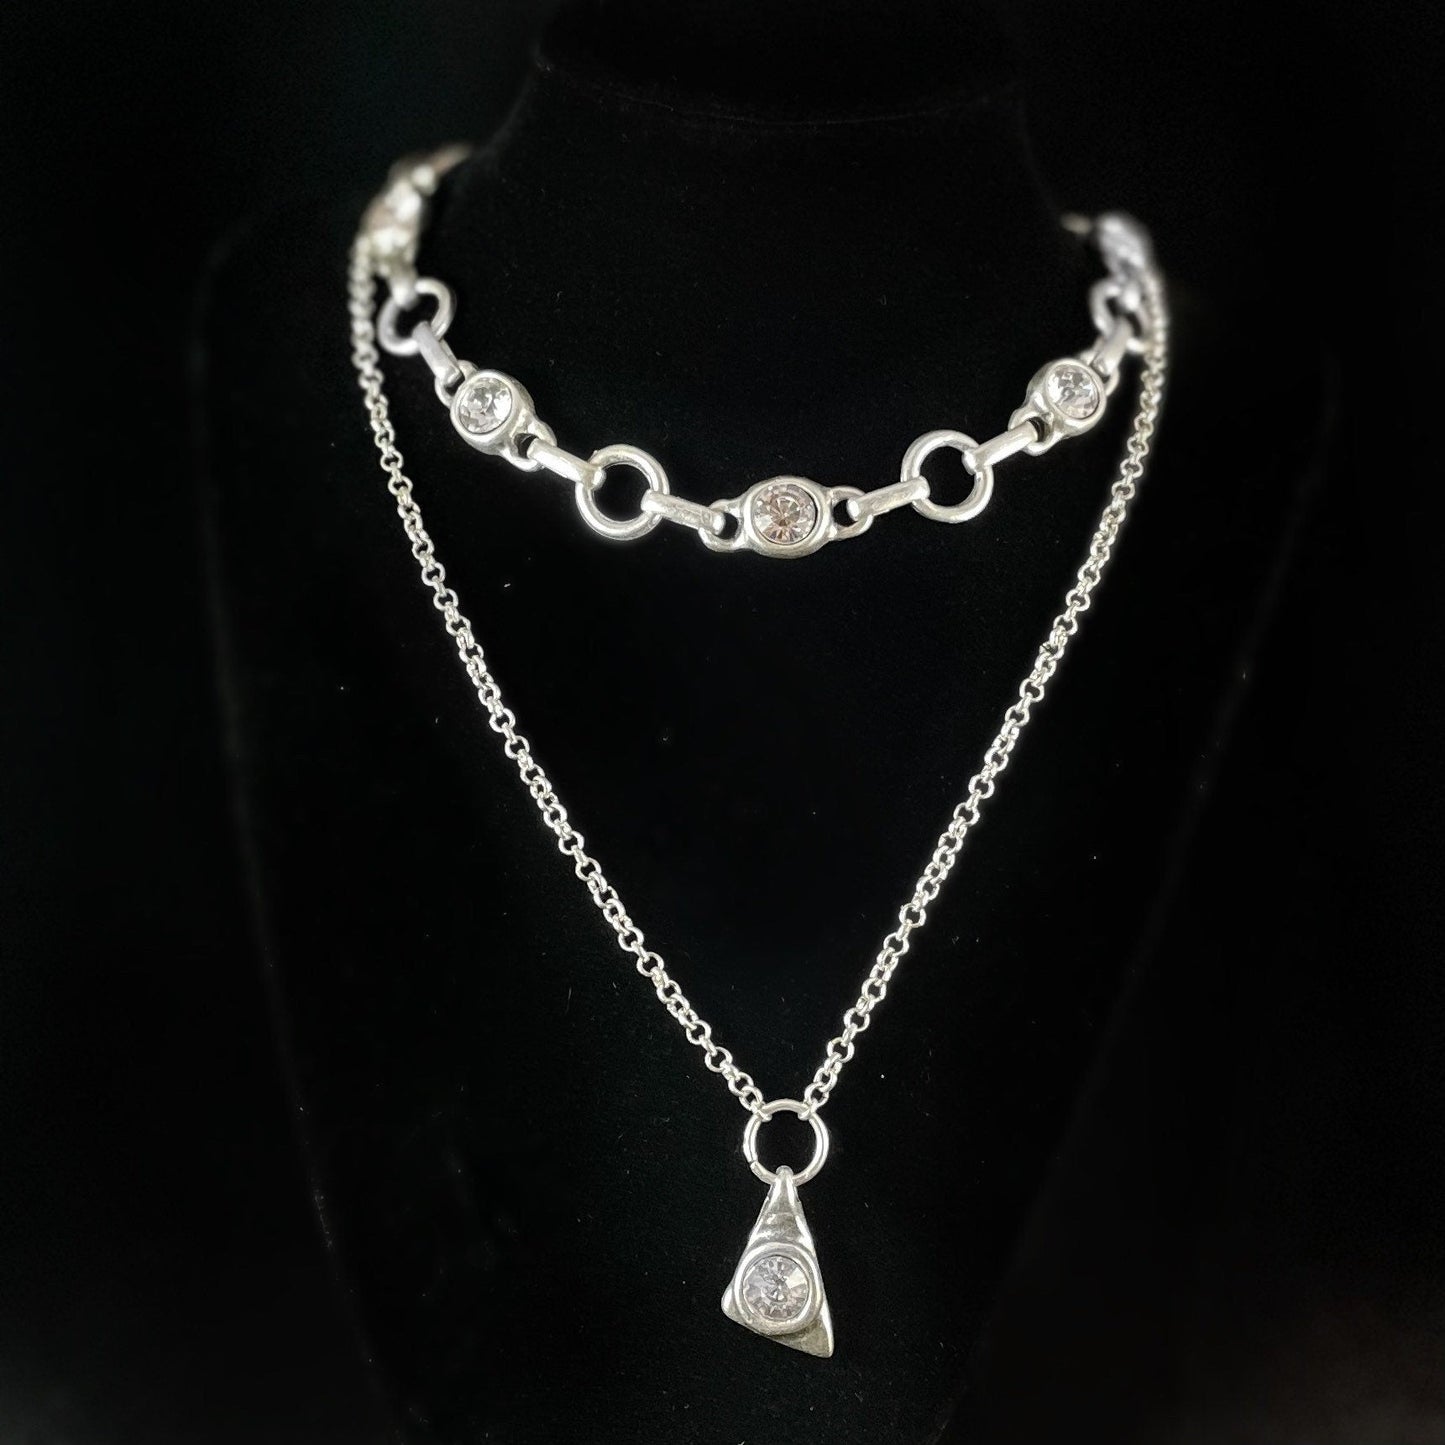 Long Silver Statement Necklace with Clear Crystal, Handmade, Nickel Free